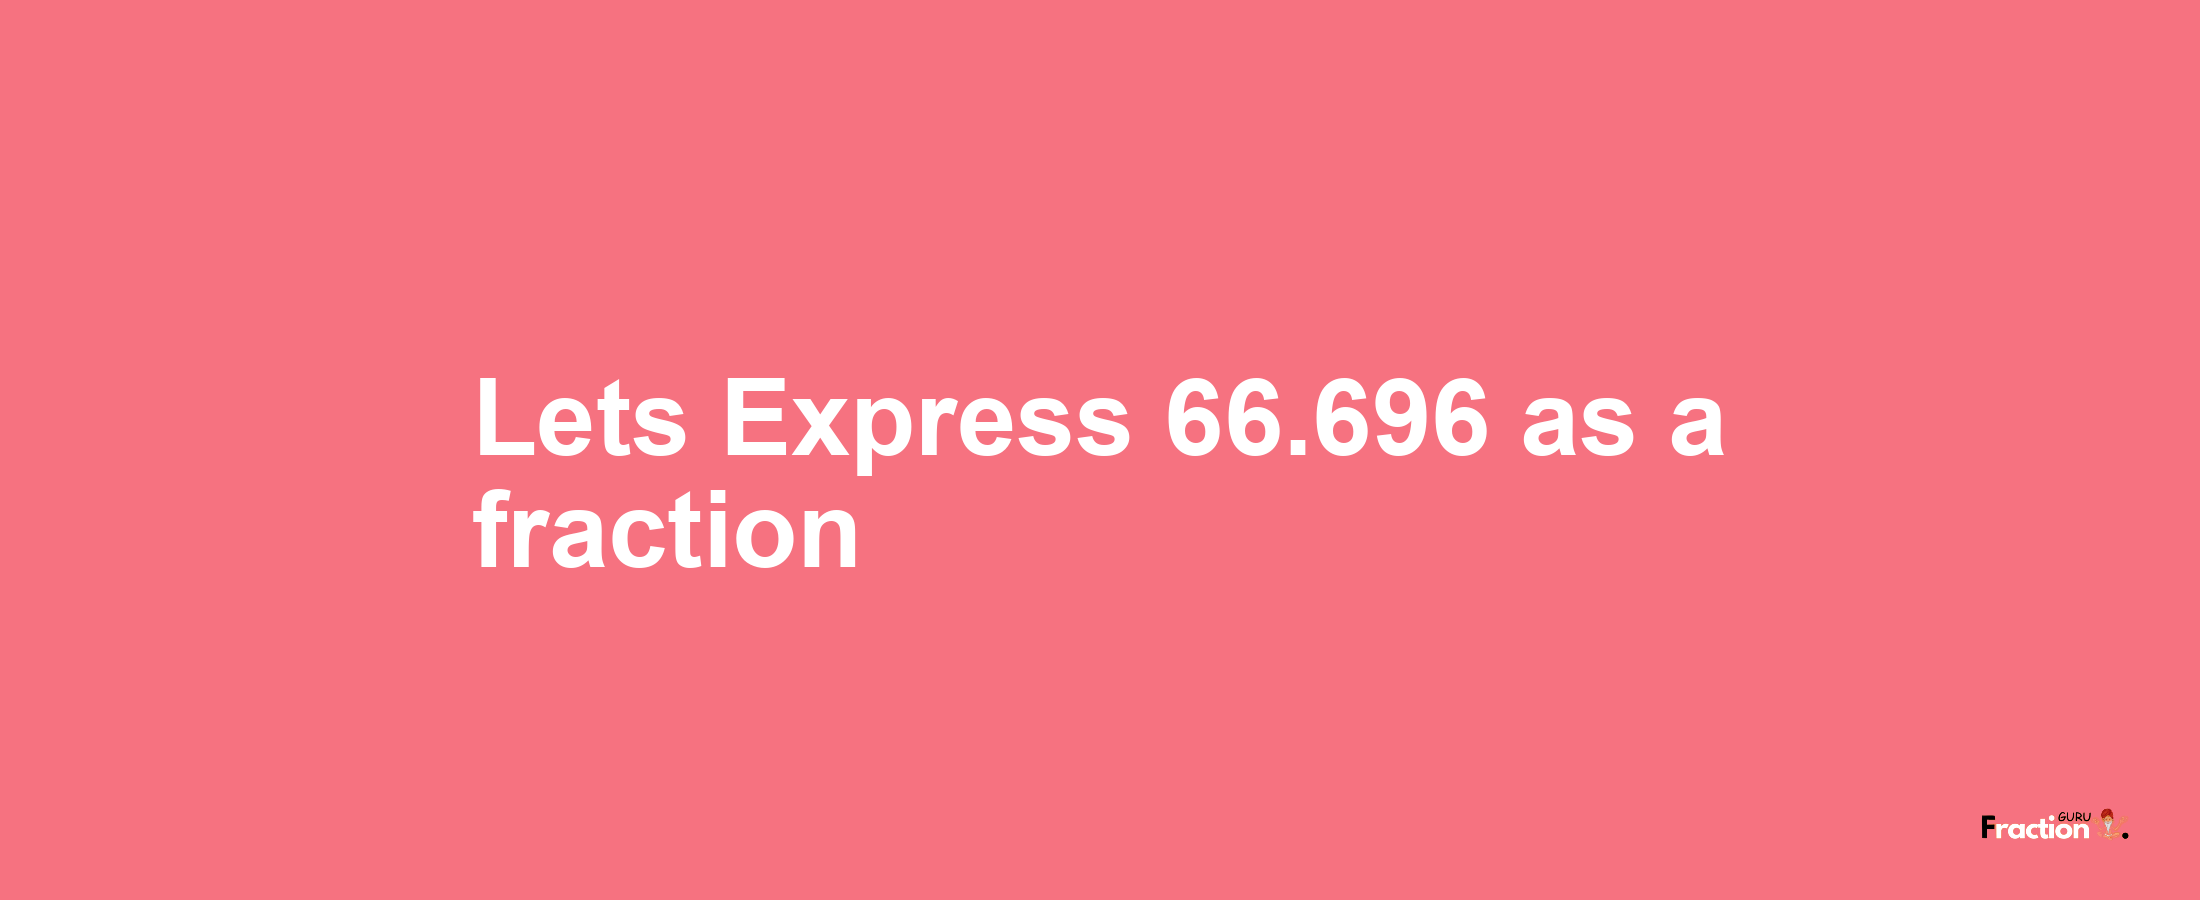 Lets Express 66.696 as afraction